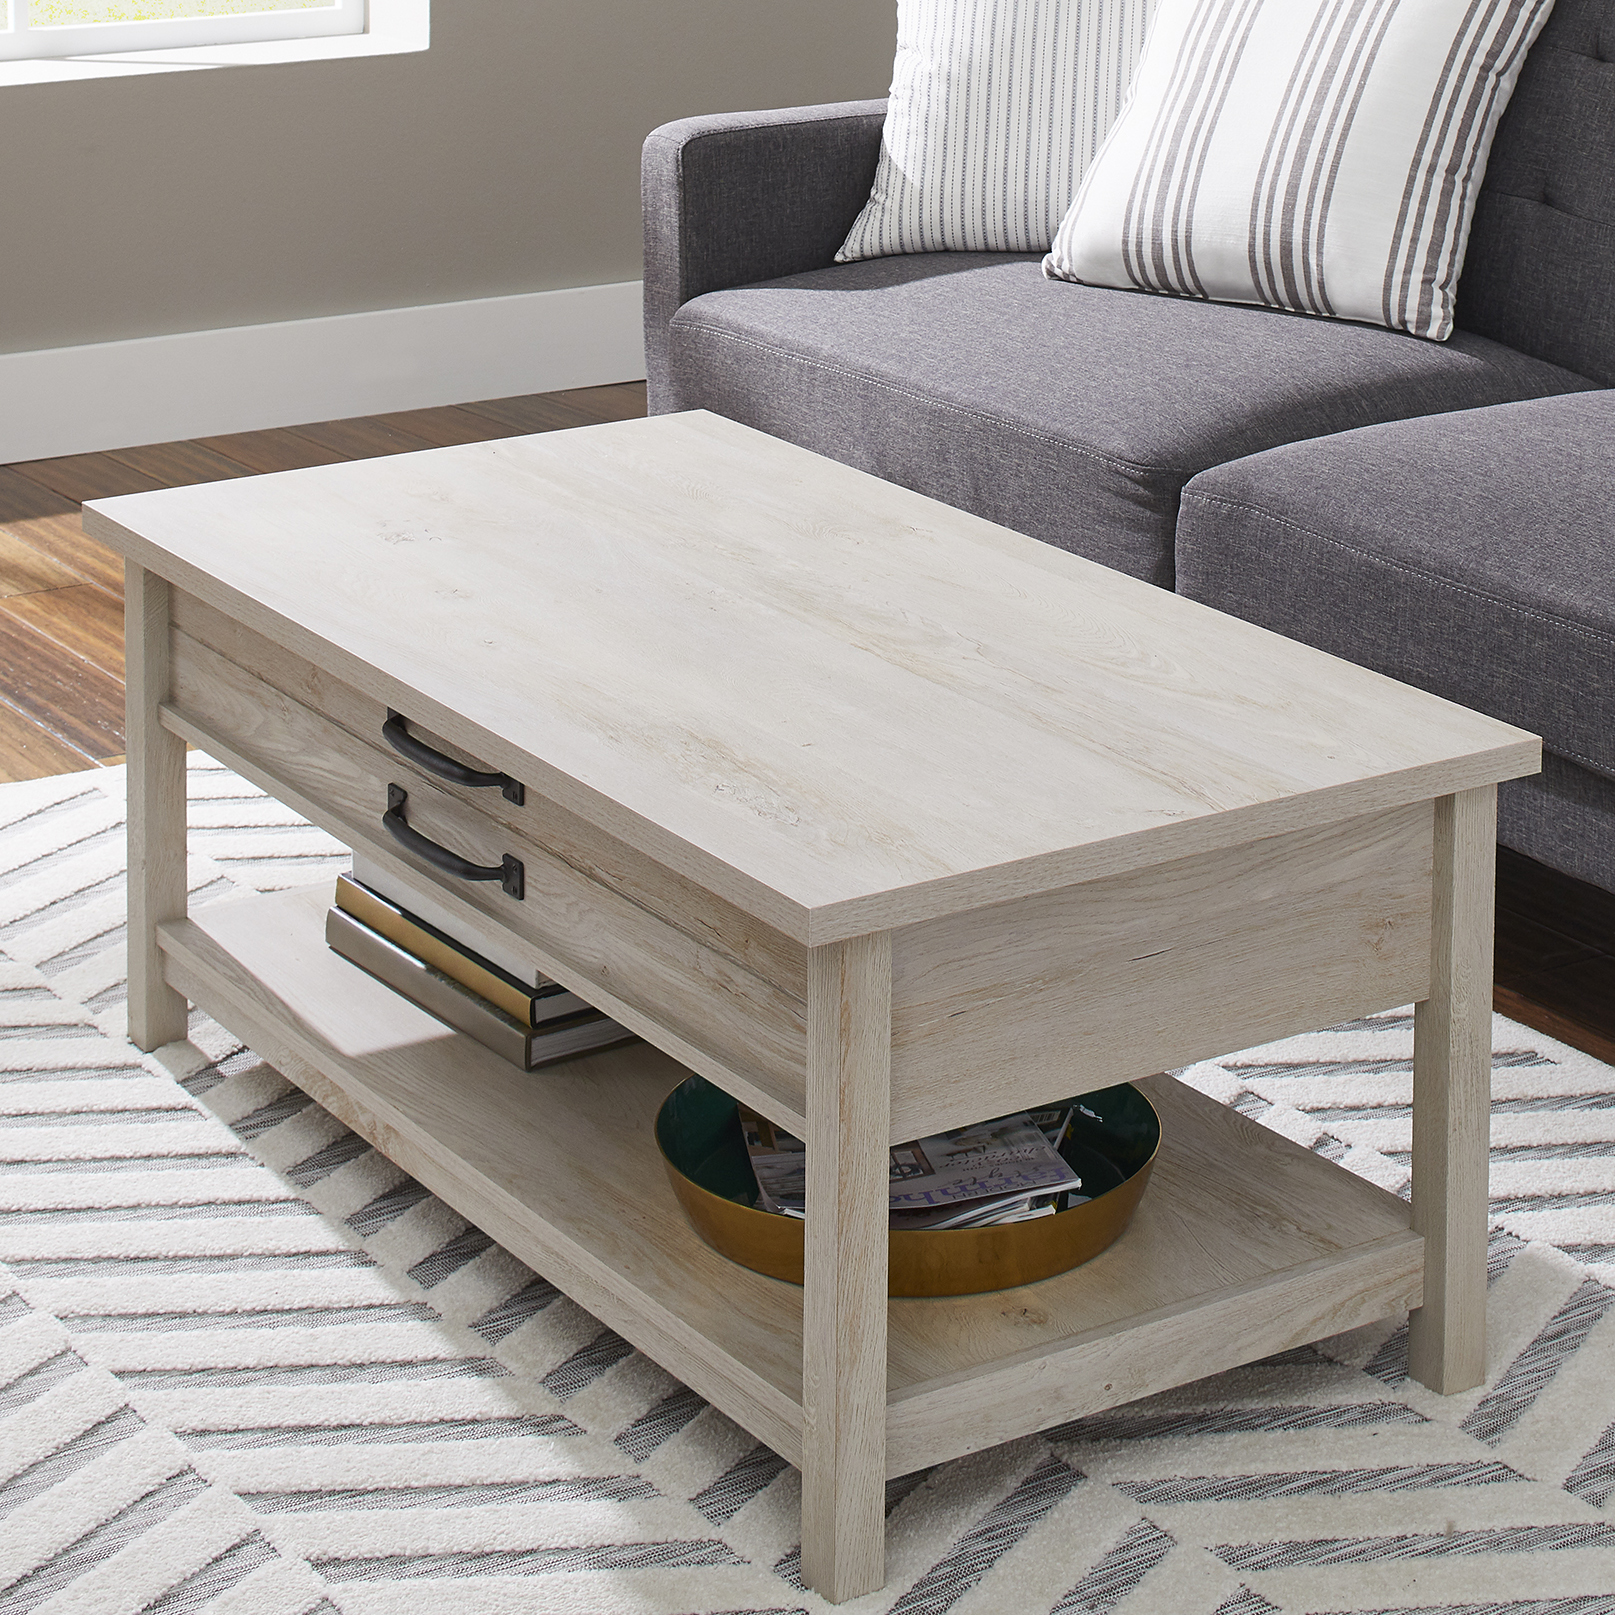 Better Homes & Gardens Modern Farmhouse Rectangle Lift Top Coffee Table, Rustic White Finish - image 5 of 16